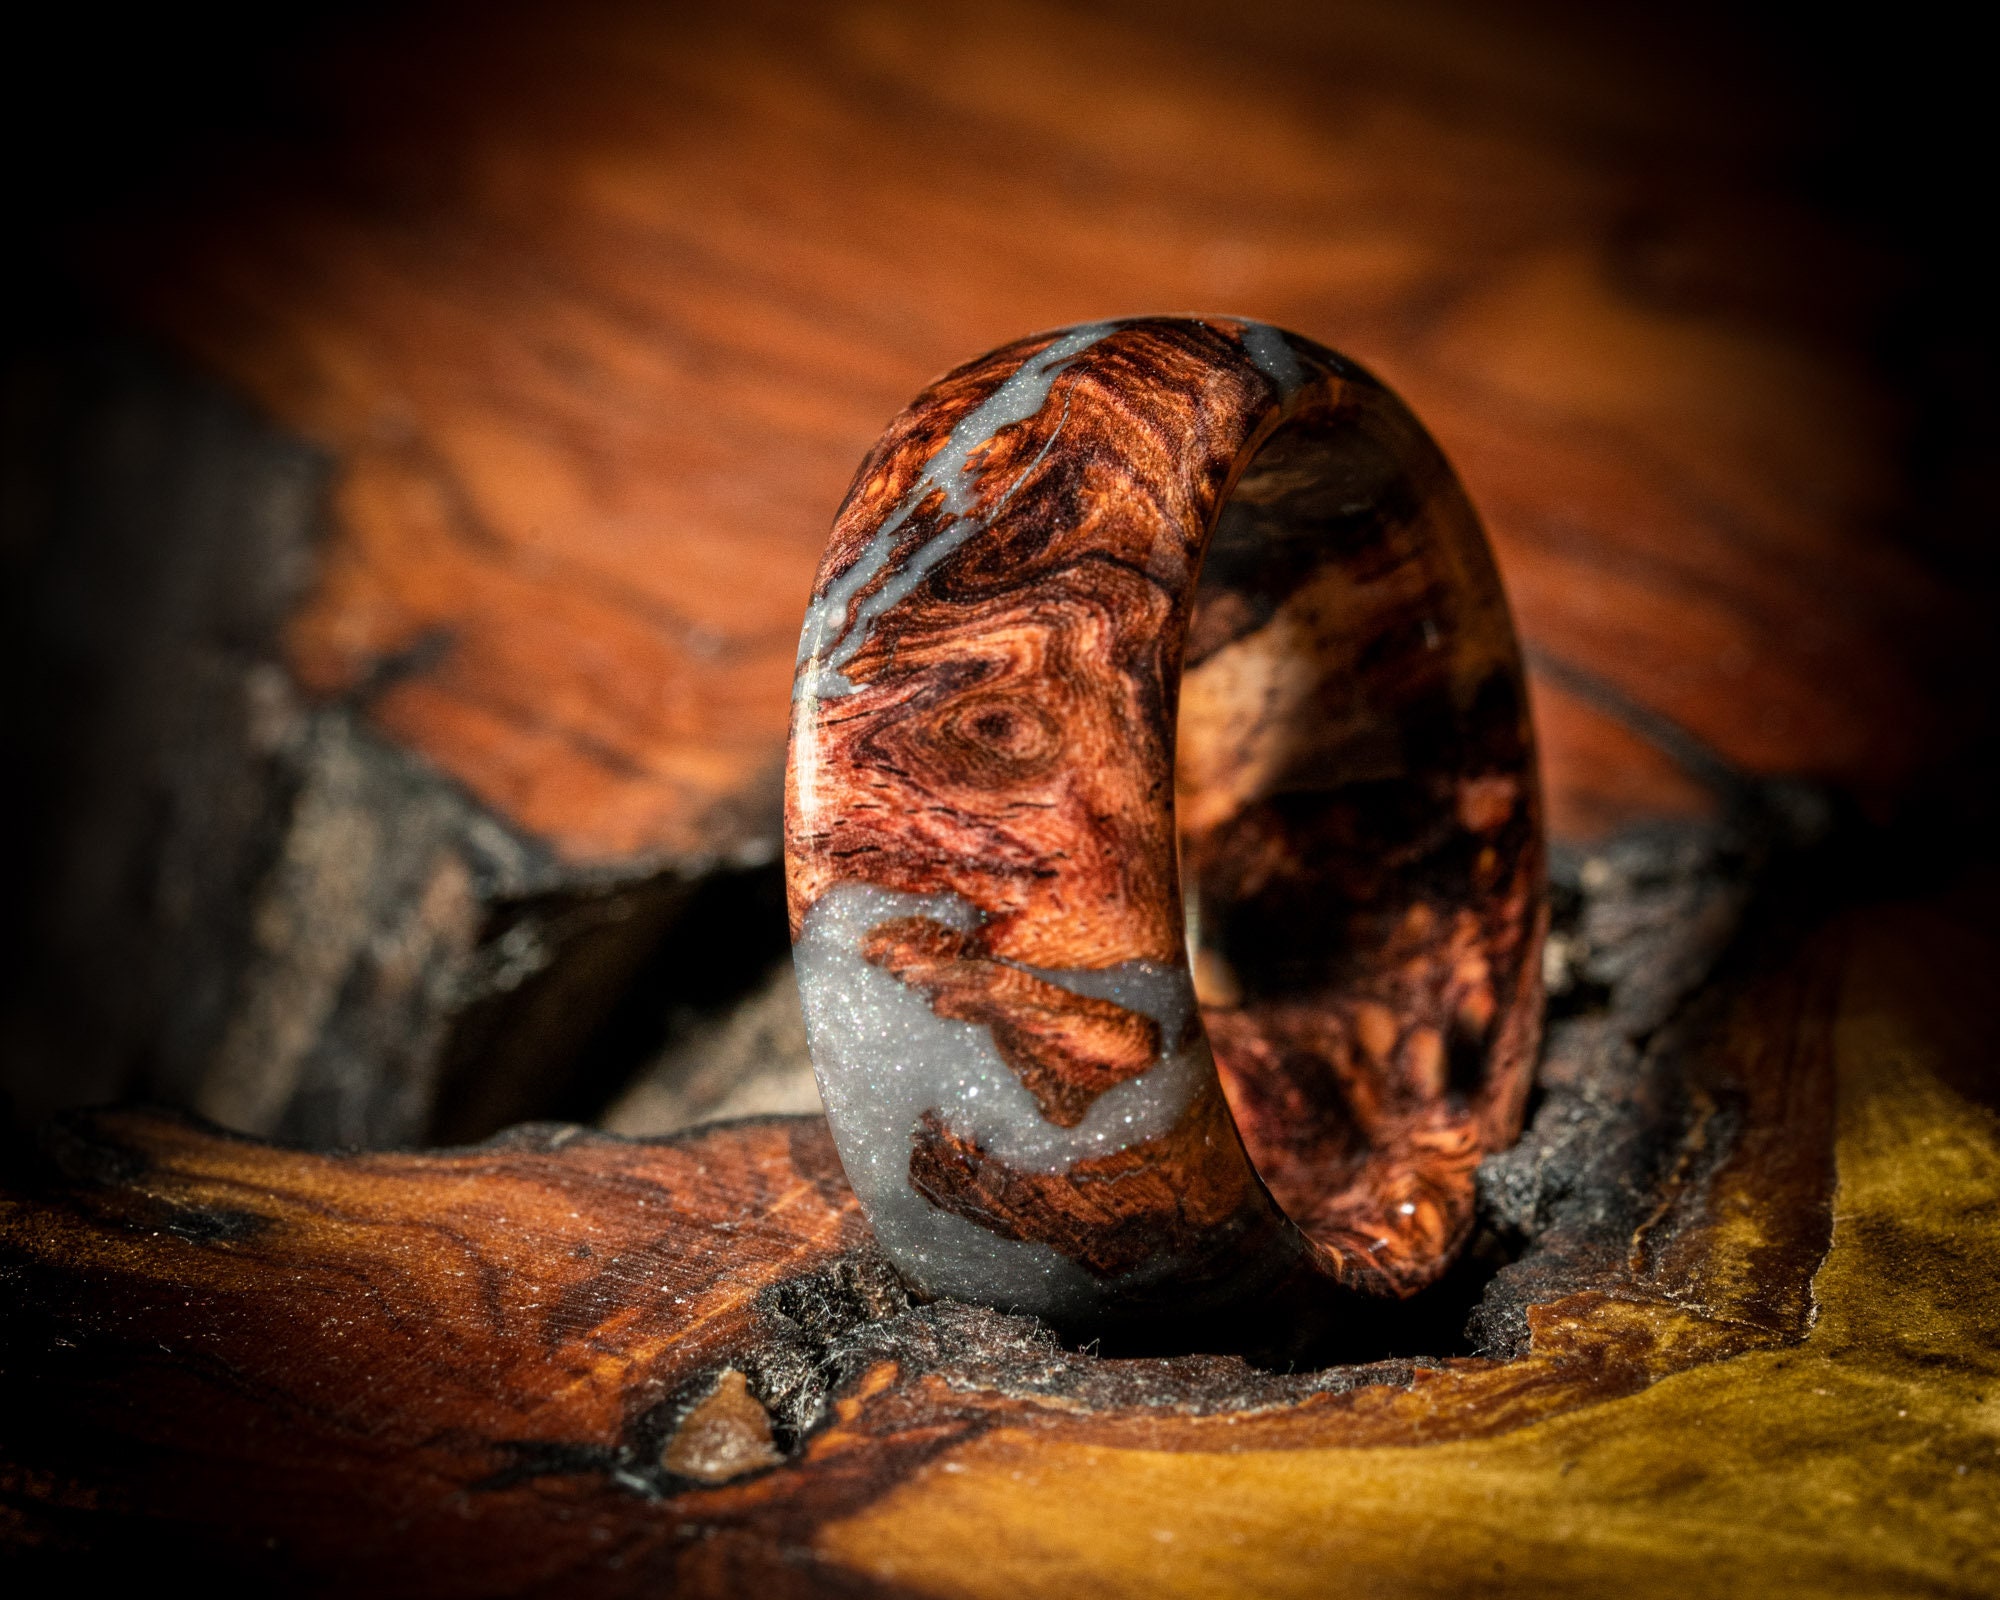 Buy Burnfair Wooden Unisex Finger Thumb Ring Band at Amazon.in